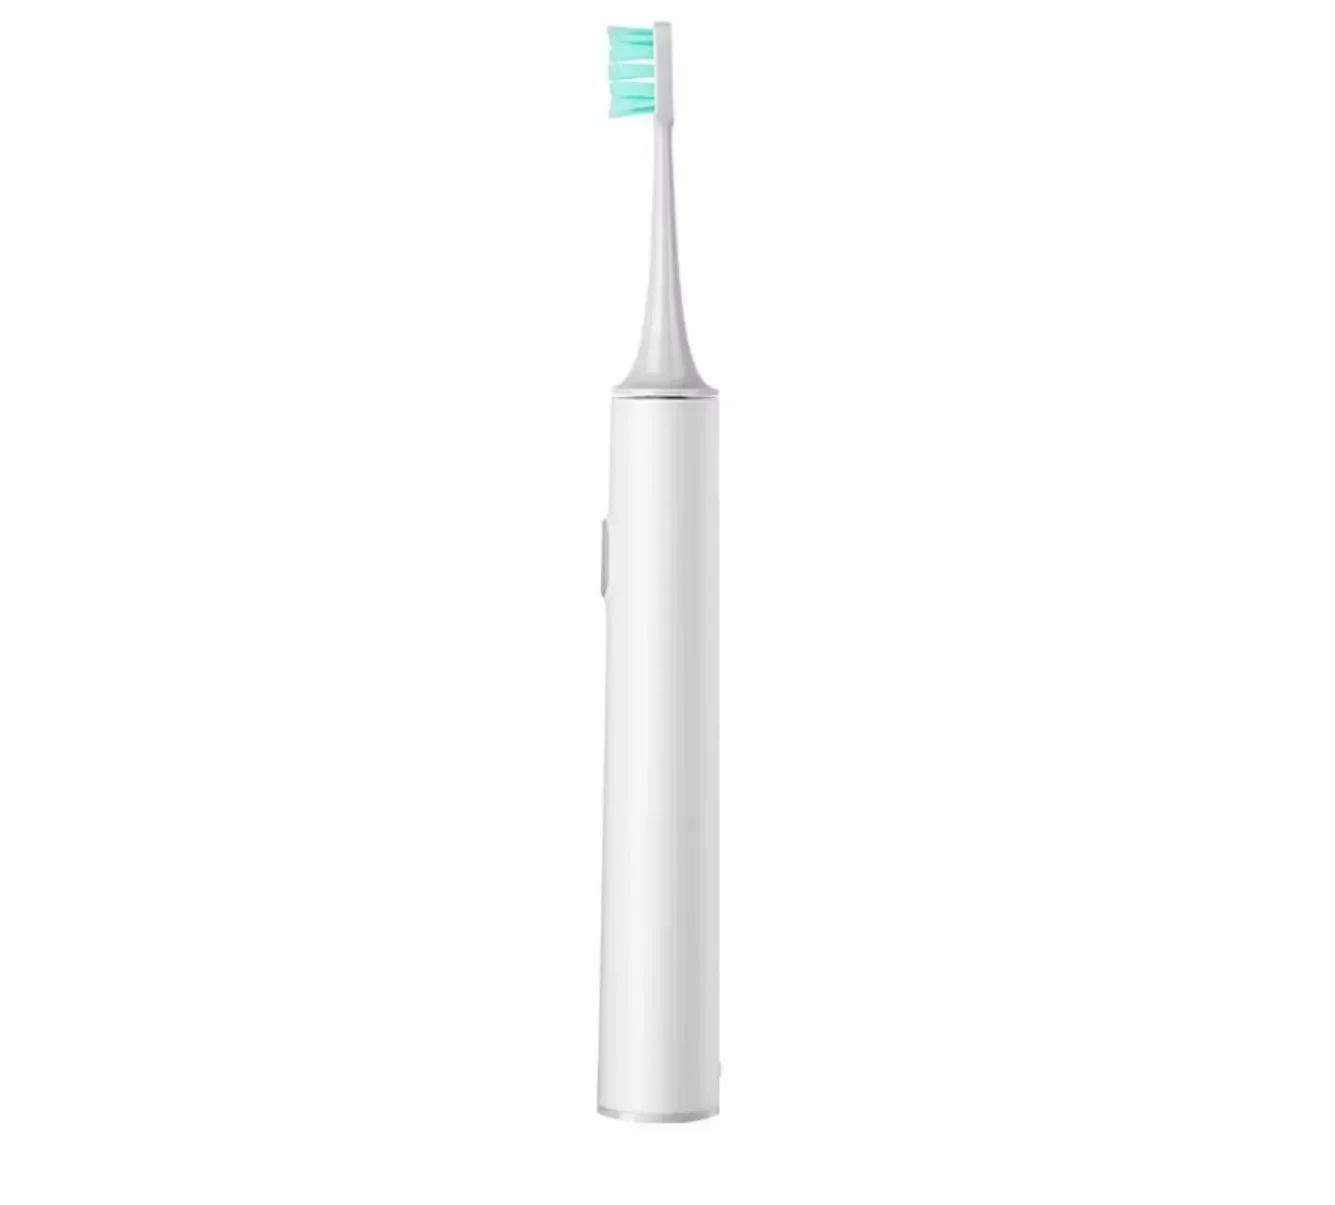 

Electric Toothbrush for Men and Women Couple Houseehold Whitening IPX7 Waterproof Toothbrushes Ultrasonic Automatic Tooth Brush